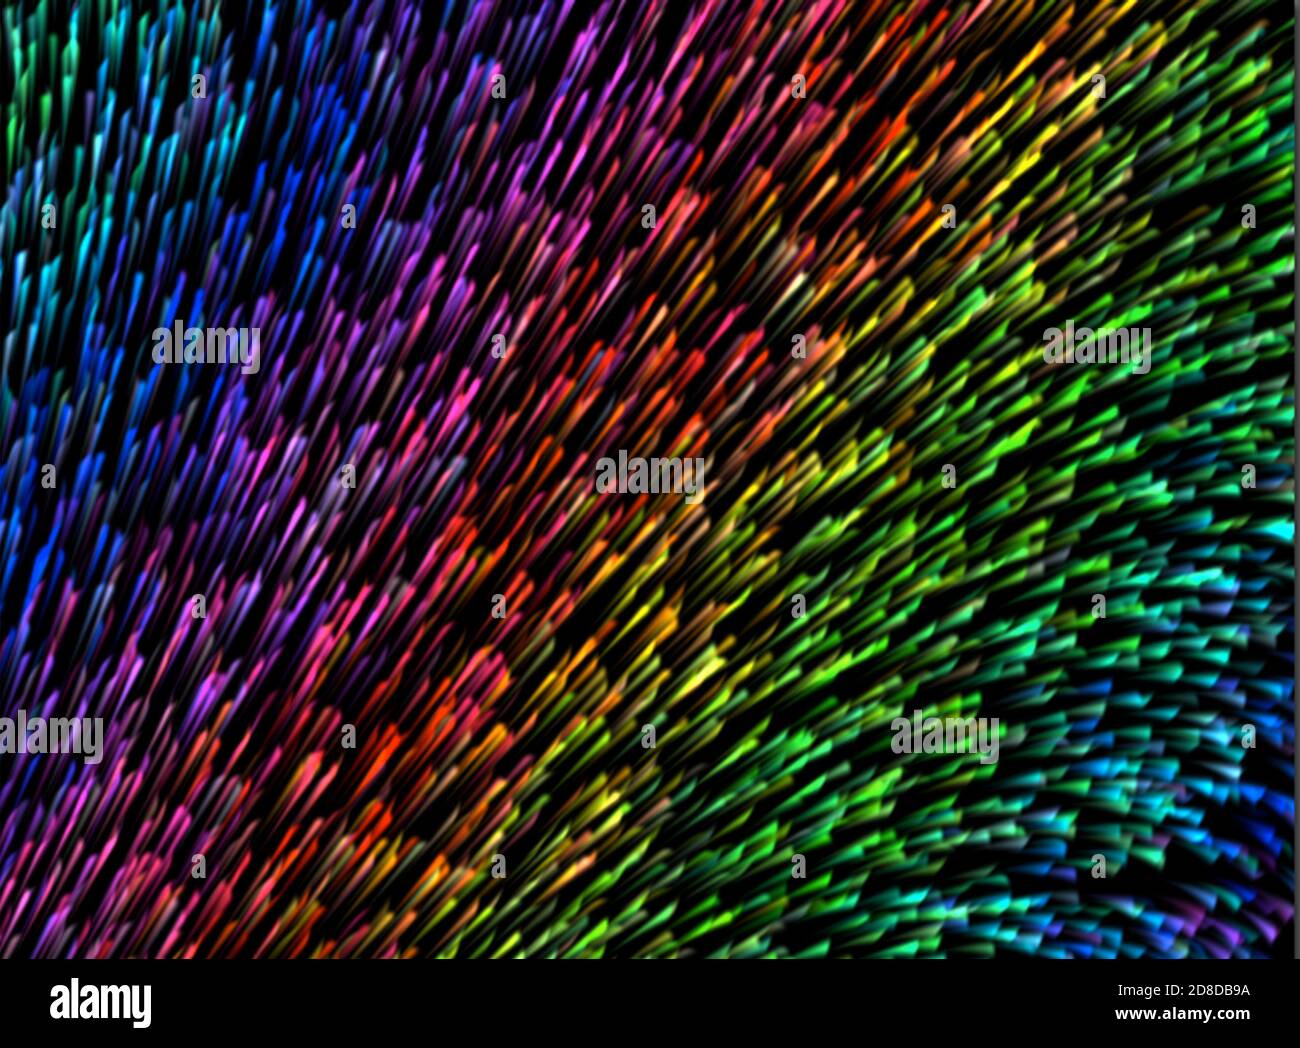 Abstract decorative red, pink, blue, yellow, green, multicolored sparks, modern background Stock Photo